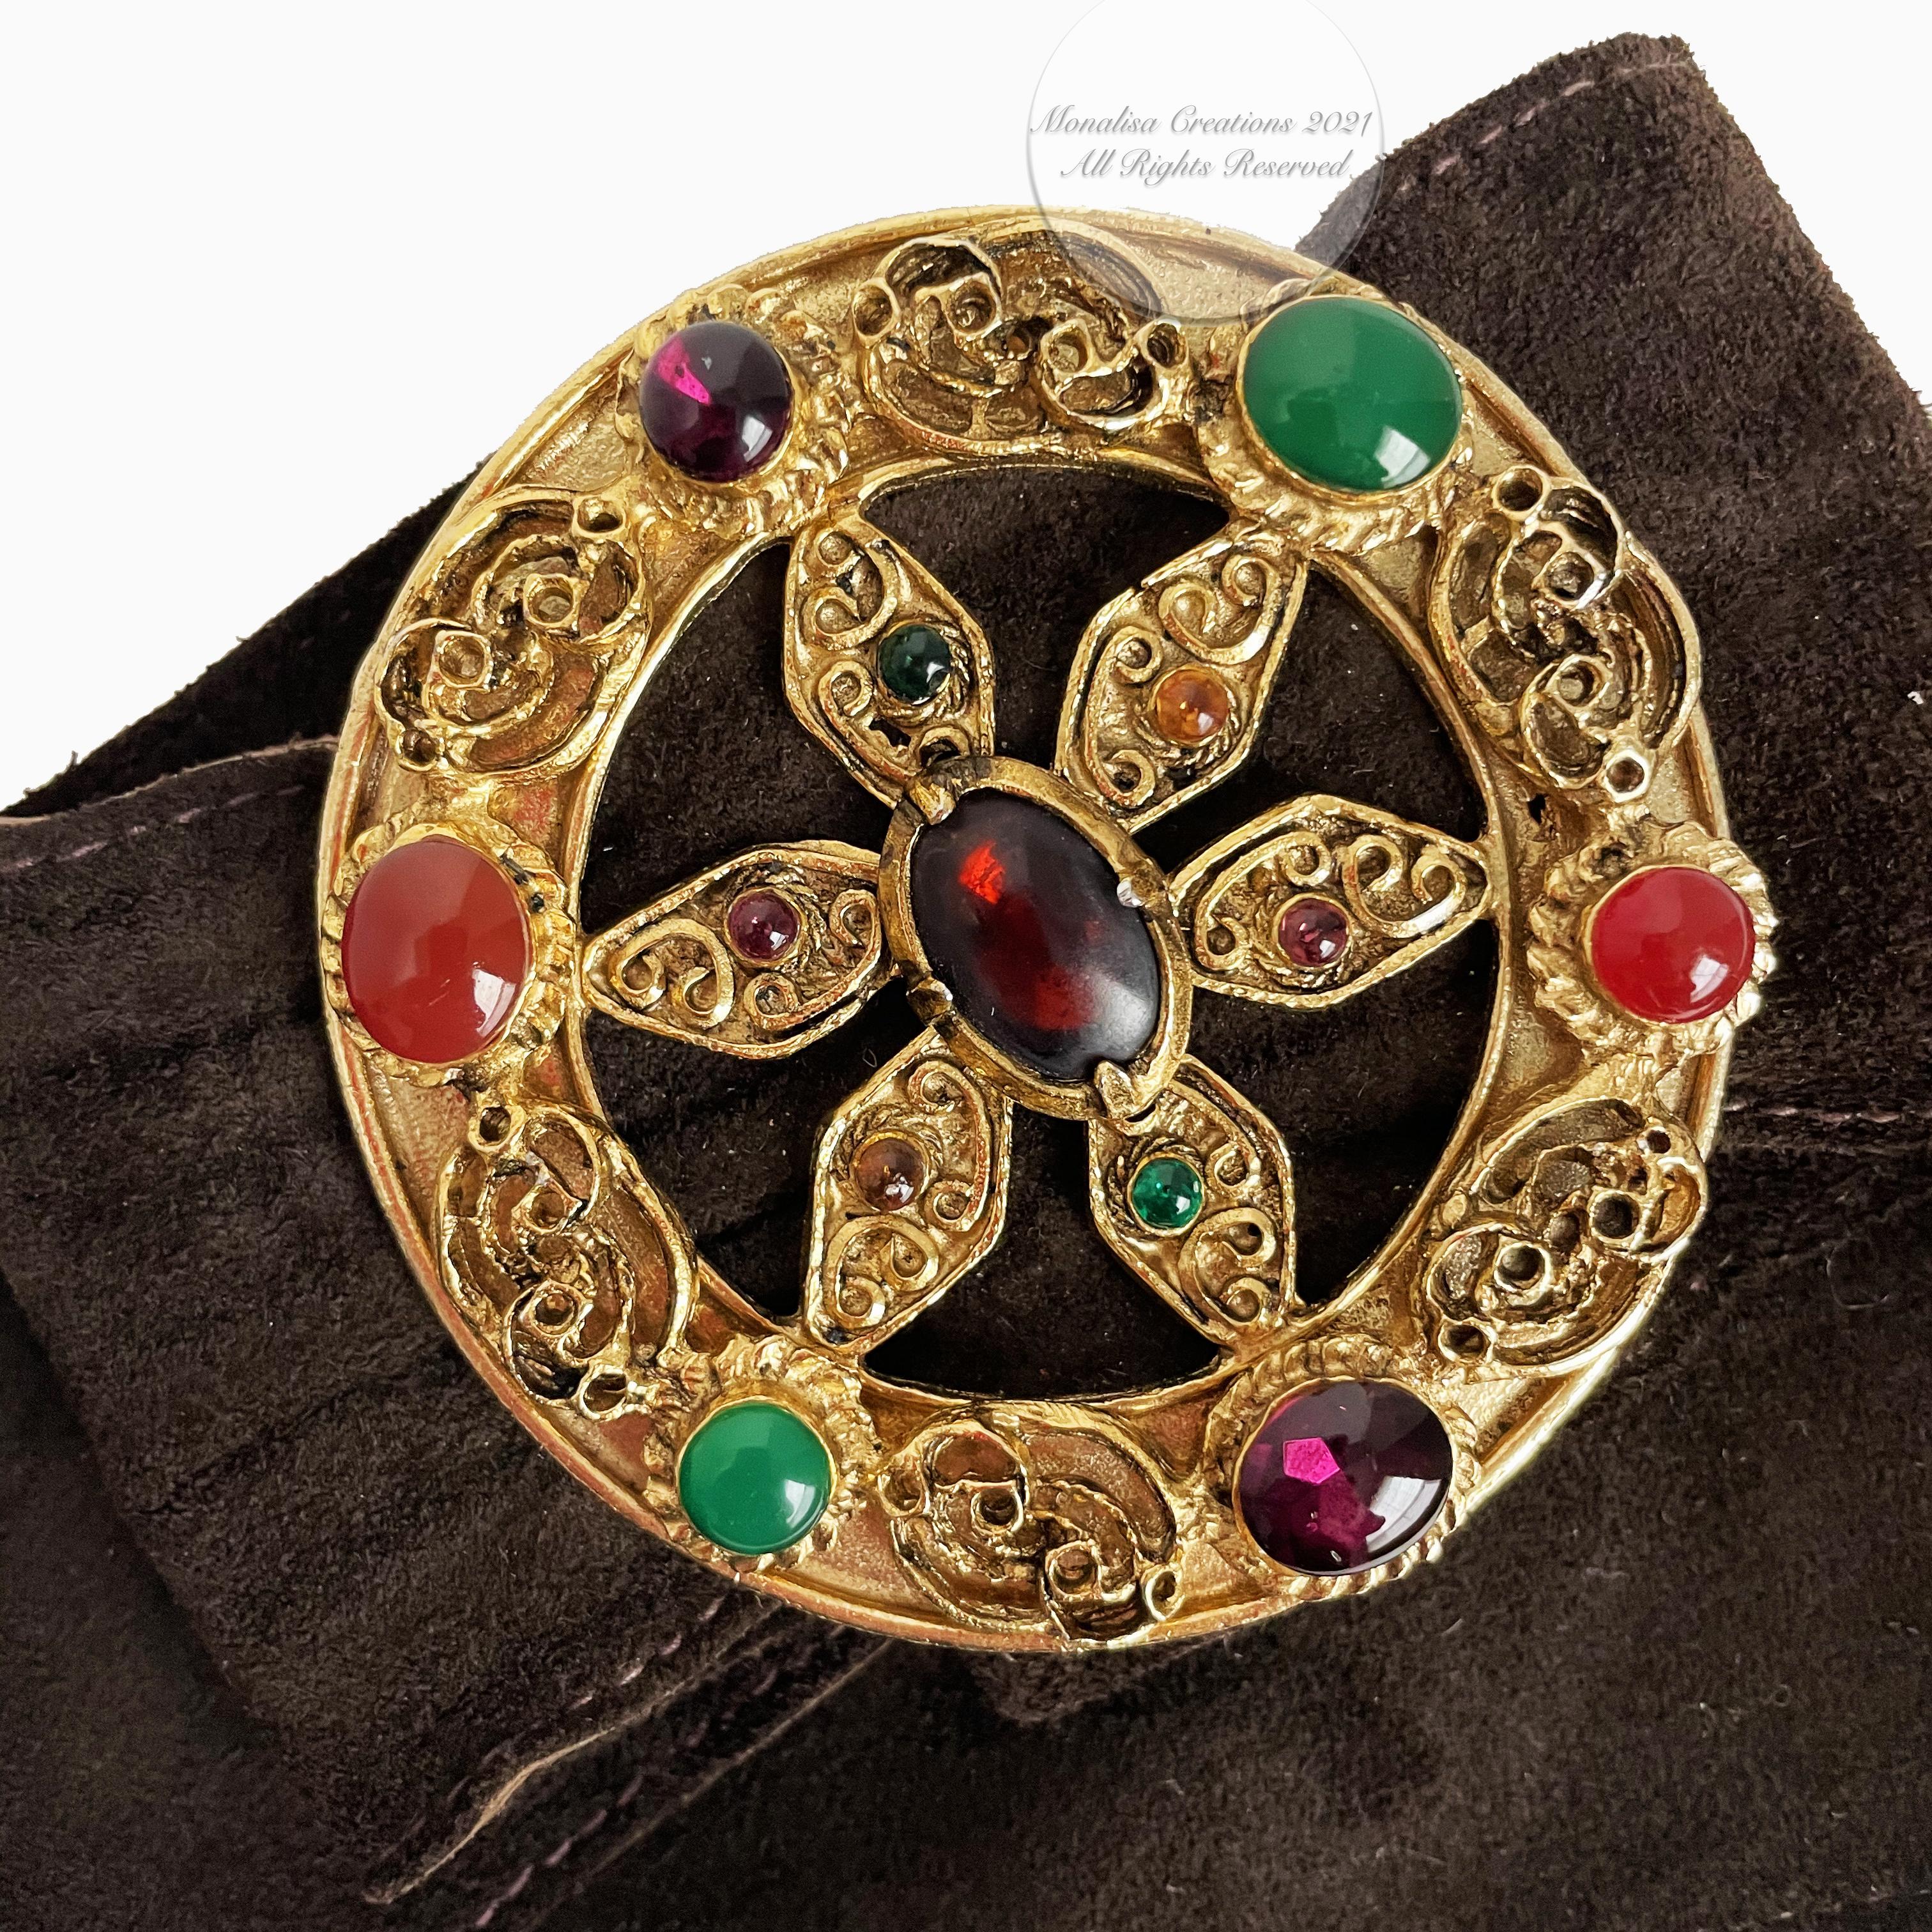 Yves Saint Laurent Belt Colorful Glass Cabochons Buckle Suede Leather 70s S/M 1